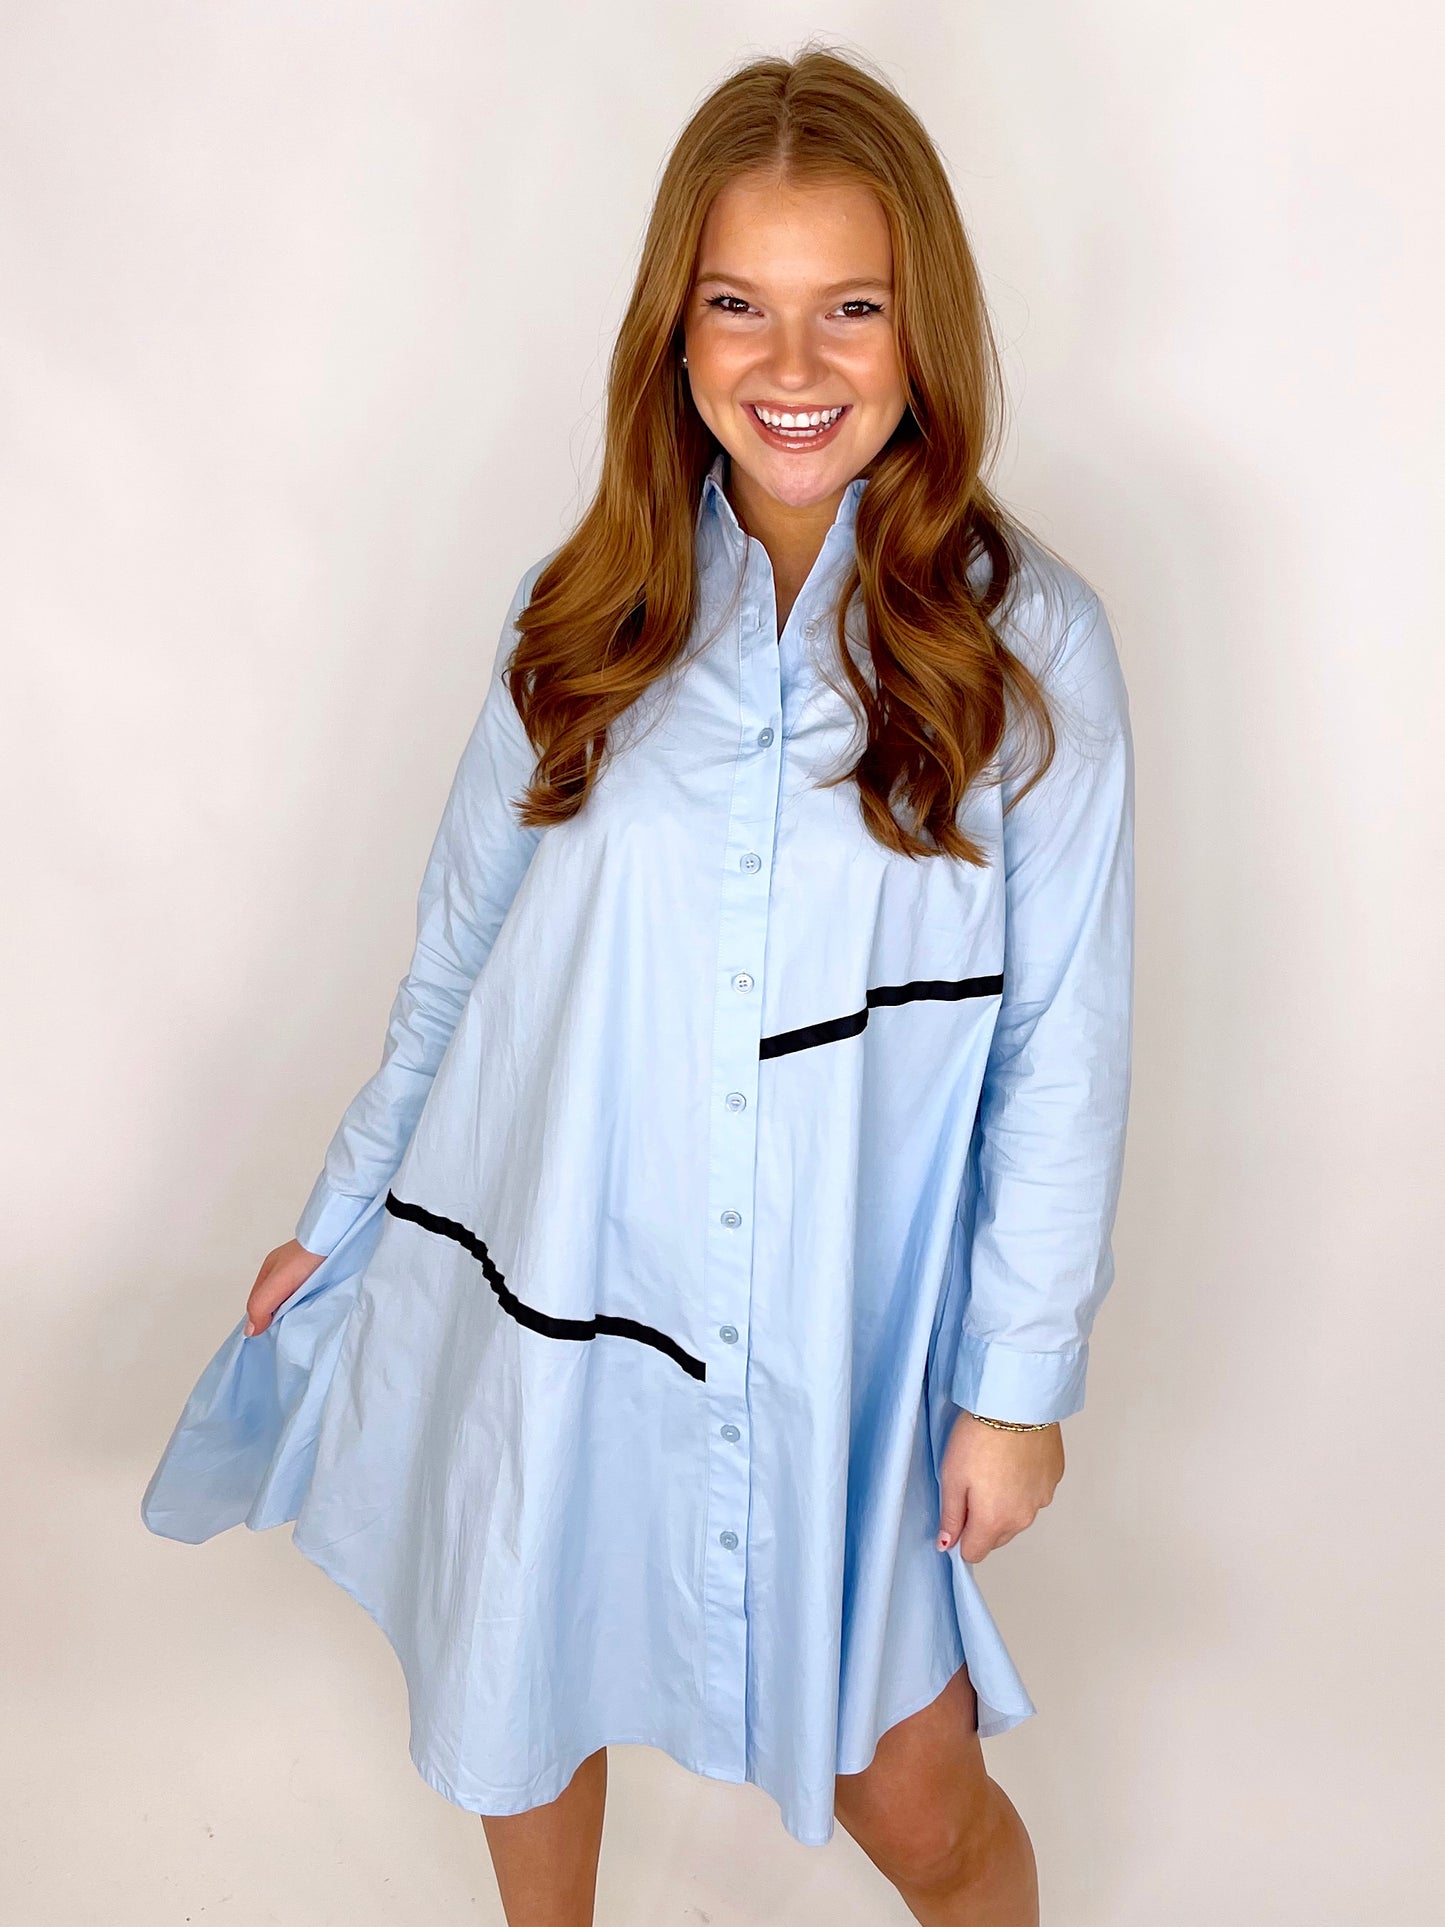 The Erica Shirt Dress-Mini Dress-Joh-The Village Shoppe, Women’s Fashion Boutique, Shop Online and In Store - Located in Muscle Shoals, AL.